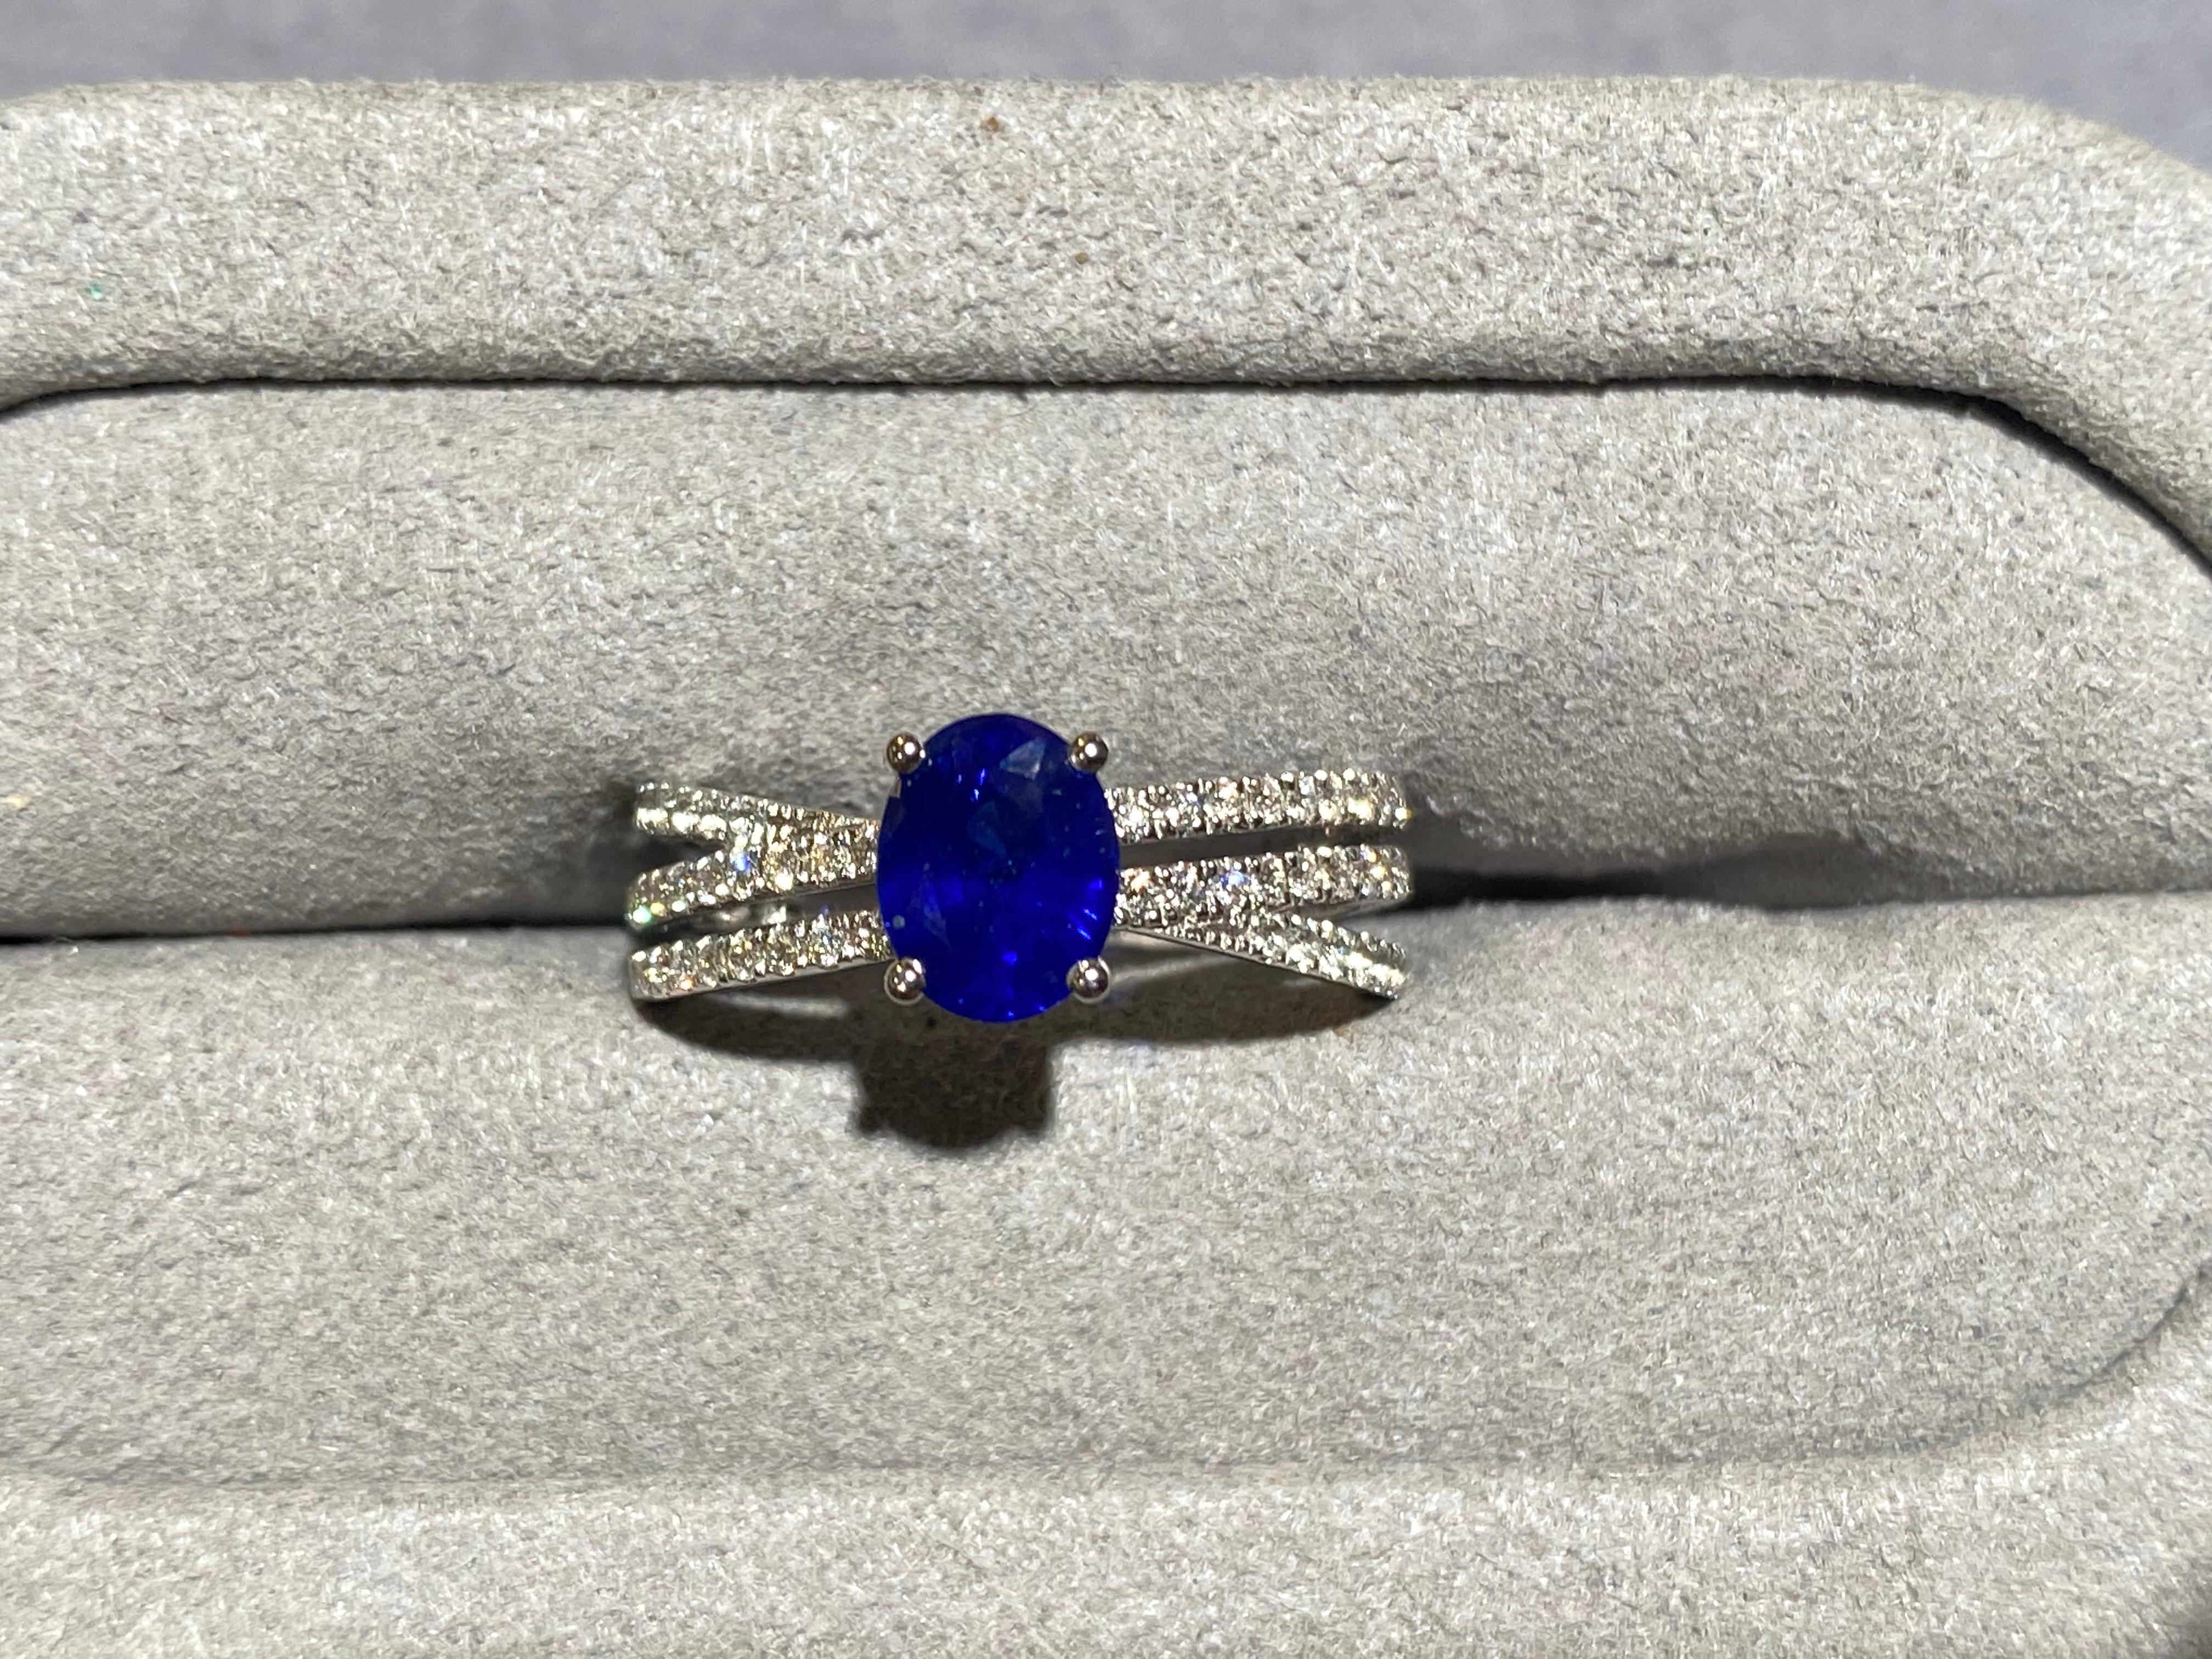 A Blue Sapphire and Diamond Ring in 18k White Gold. The main sapphire is secured by 4 white gold claws and the band of the ring is made up of 3 lines of diamond pave. Two of the diamond pave lines are parallel to each other while the the other